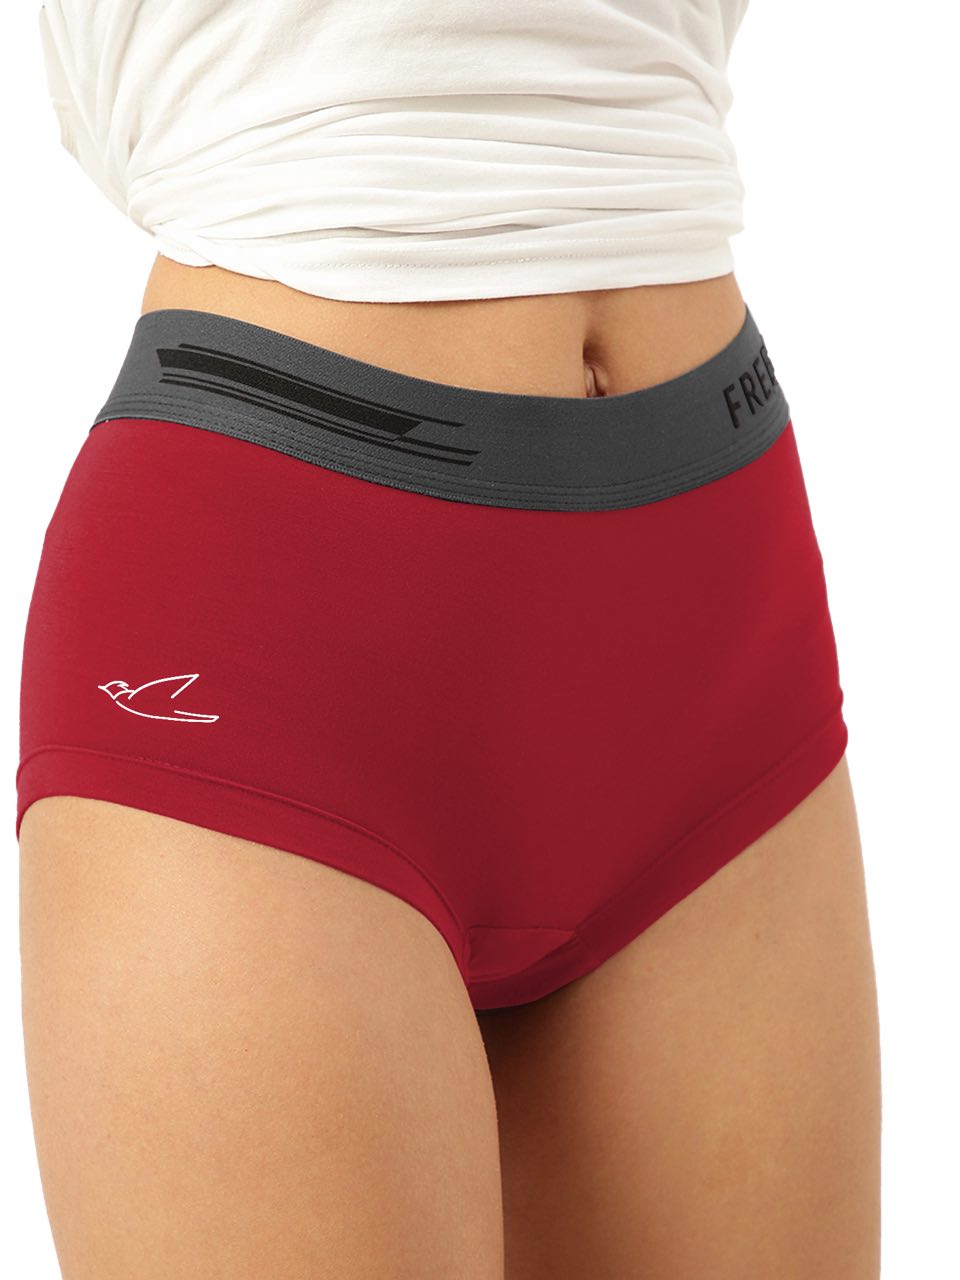 Men's Brief And Women's Boxer Brief Combo (Pack of 2)